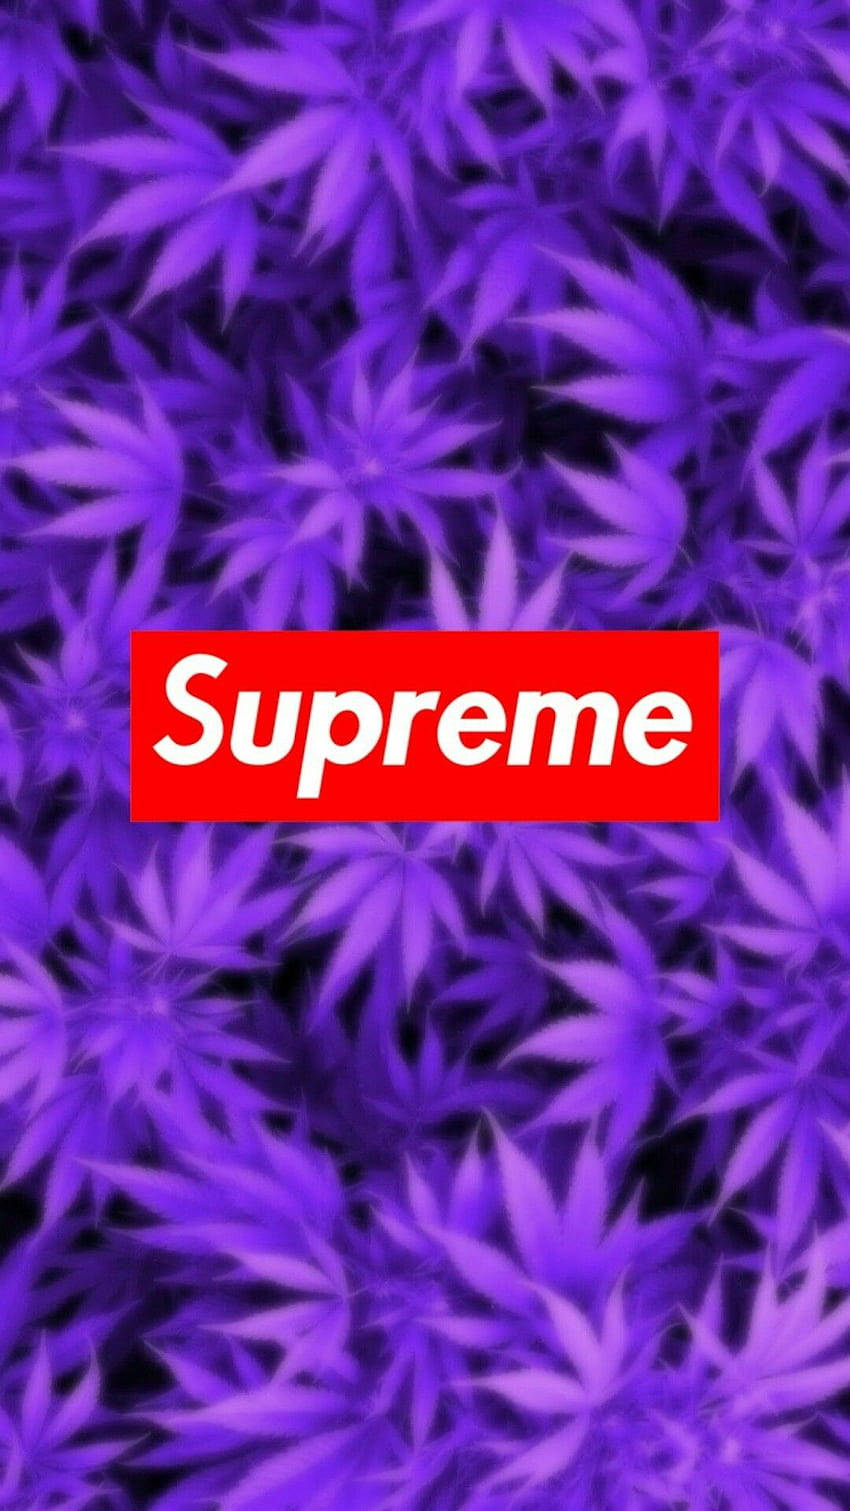 Supreme Aesthetic Red On Purple Background